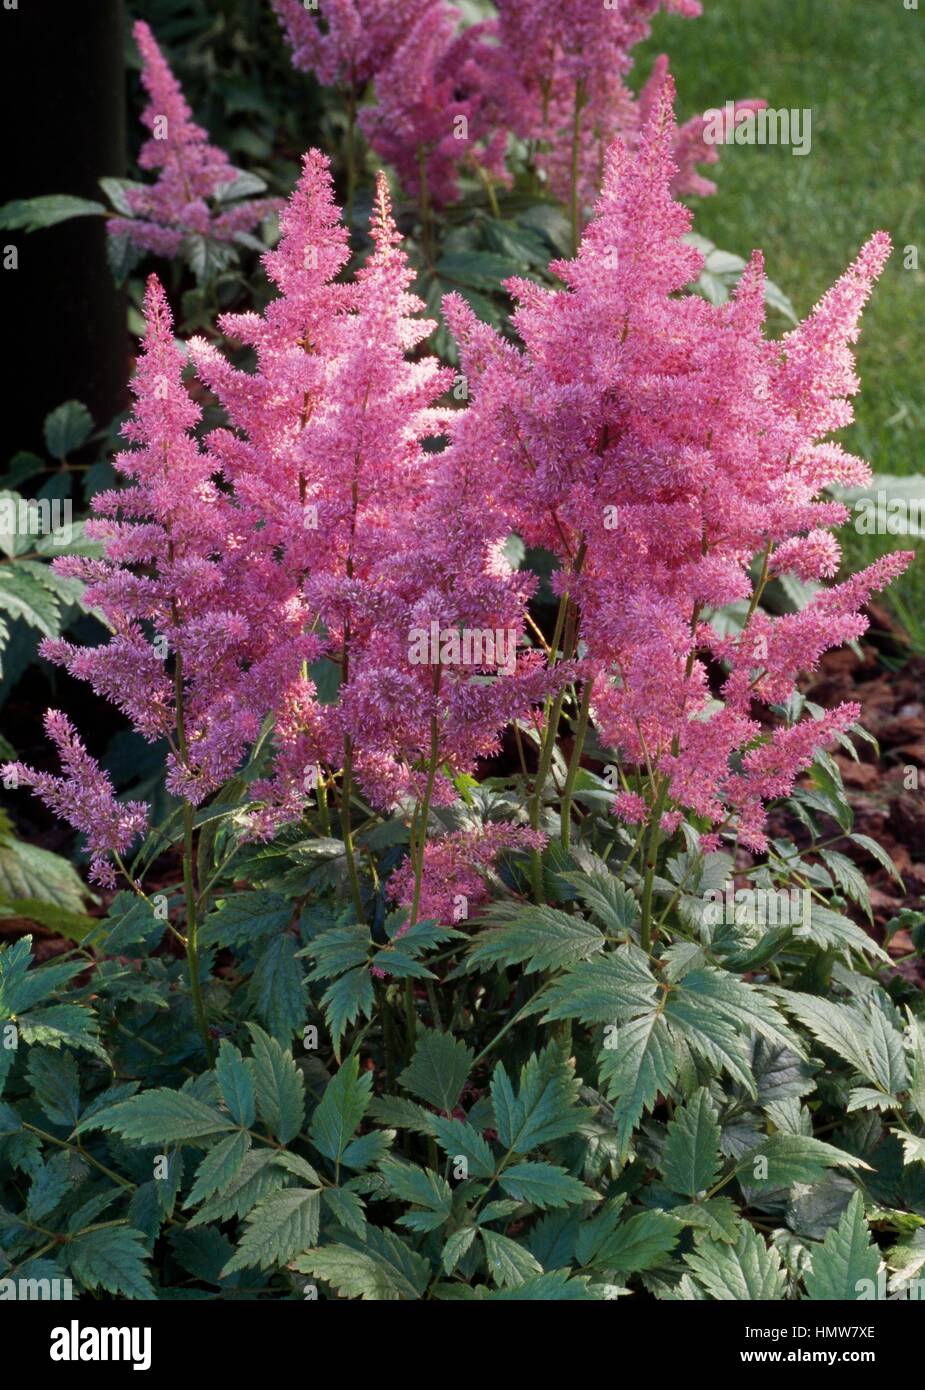 Hybrid japanese astilbe in bloom (Astilbe japonica Mainz), Saxifragaceae. Stock Photo